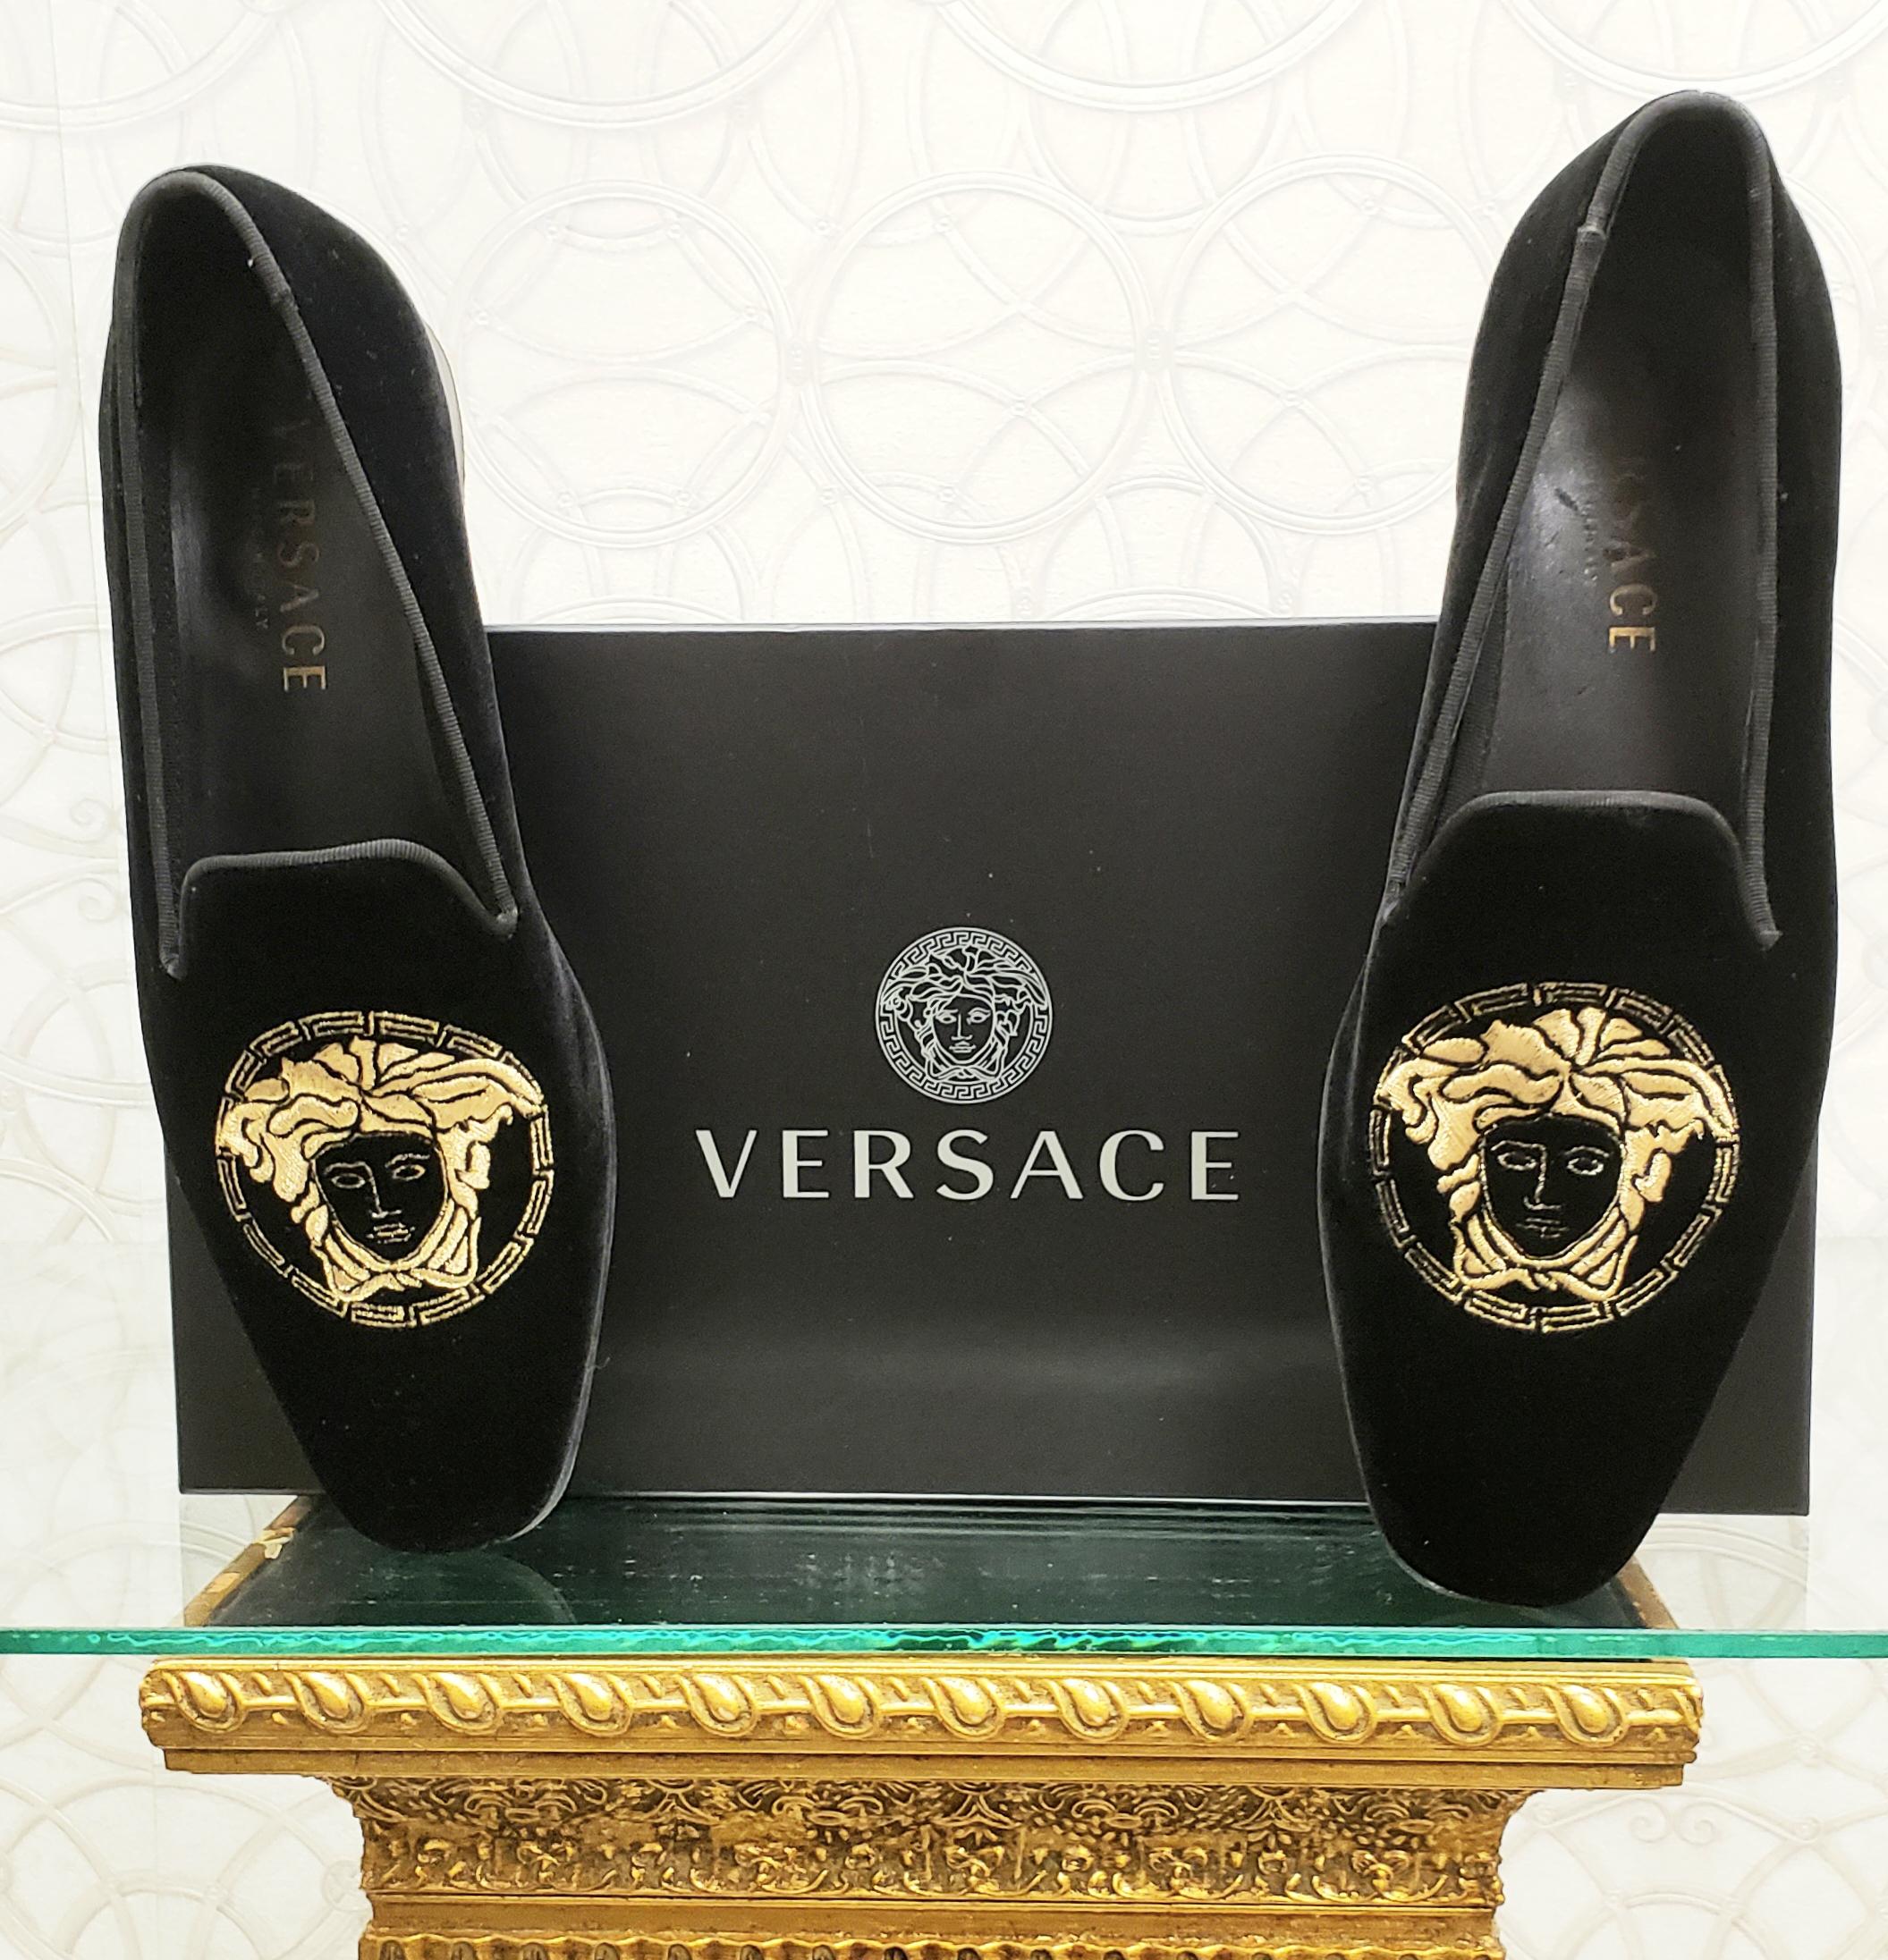 VERSACE

Black City Loafer Shoe

Exclusive black/gold colorway
Stacked heel
Almond toe
Slip-on style

Content: Leather/polyester/cotton upper
Lining: 100% leather


Made in Italy



      Italian Size is 39.5 - US 6.5       

Pre-owned. Great